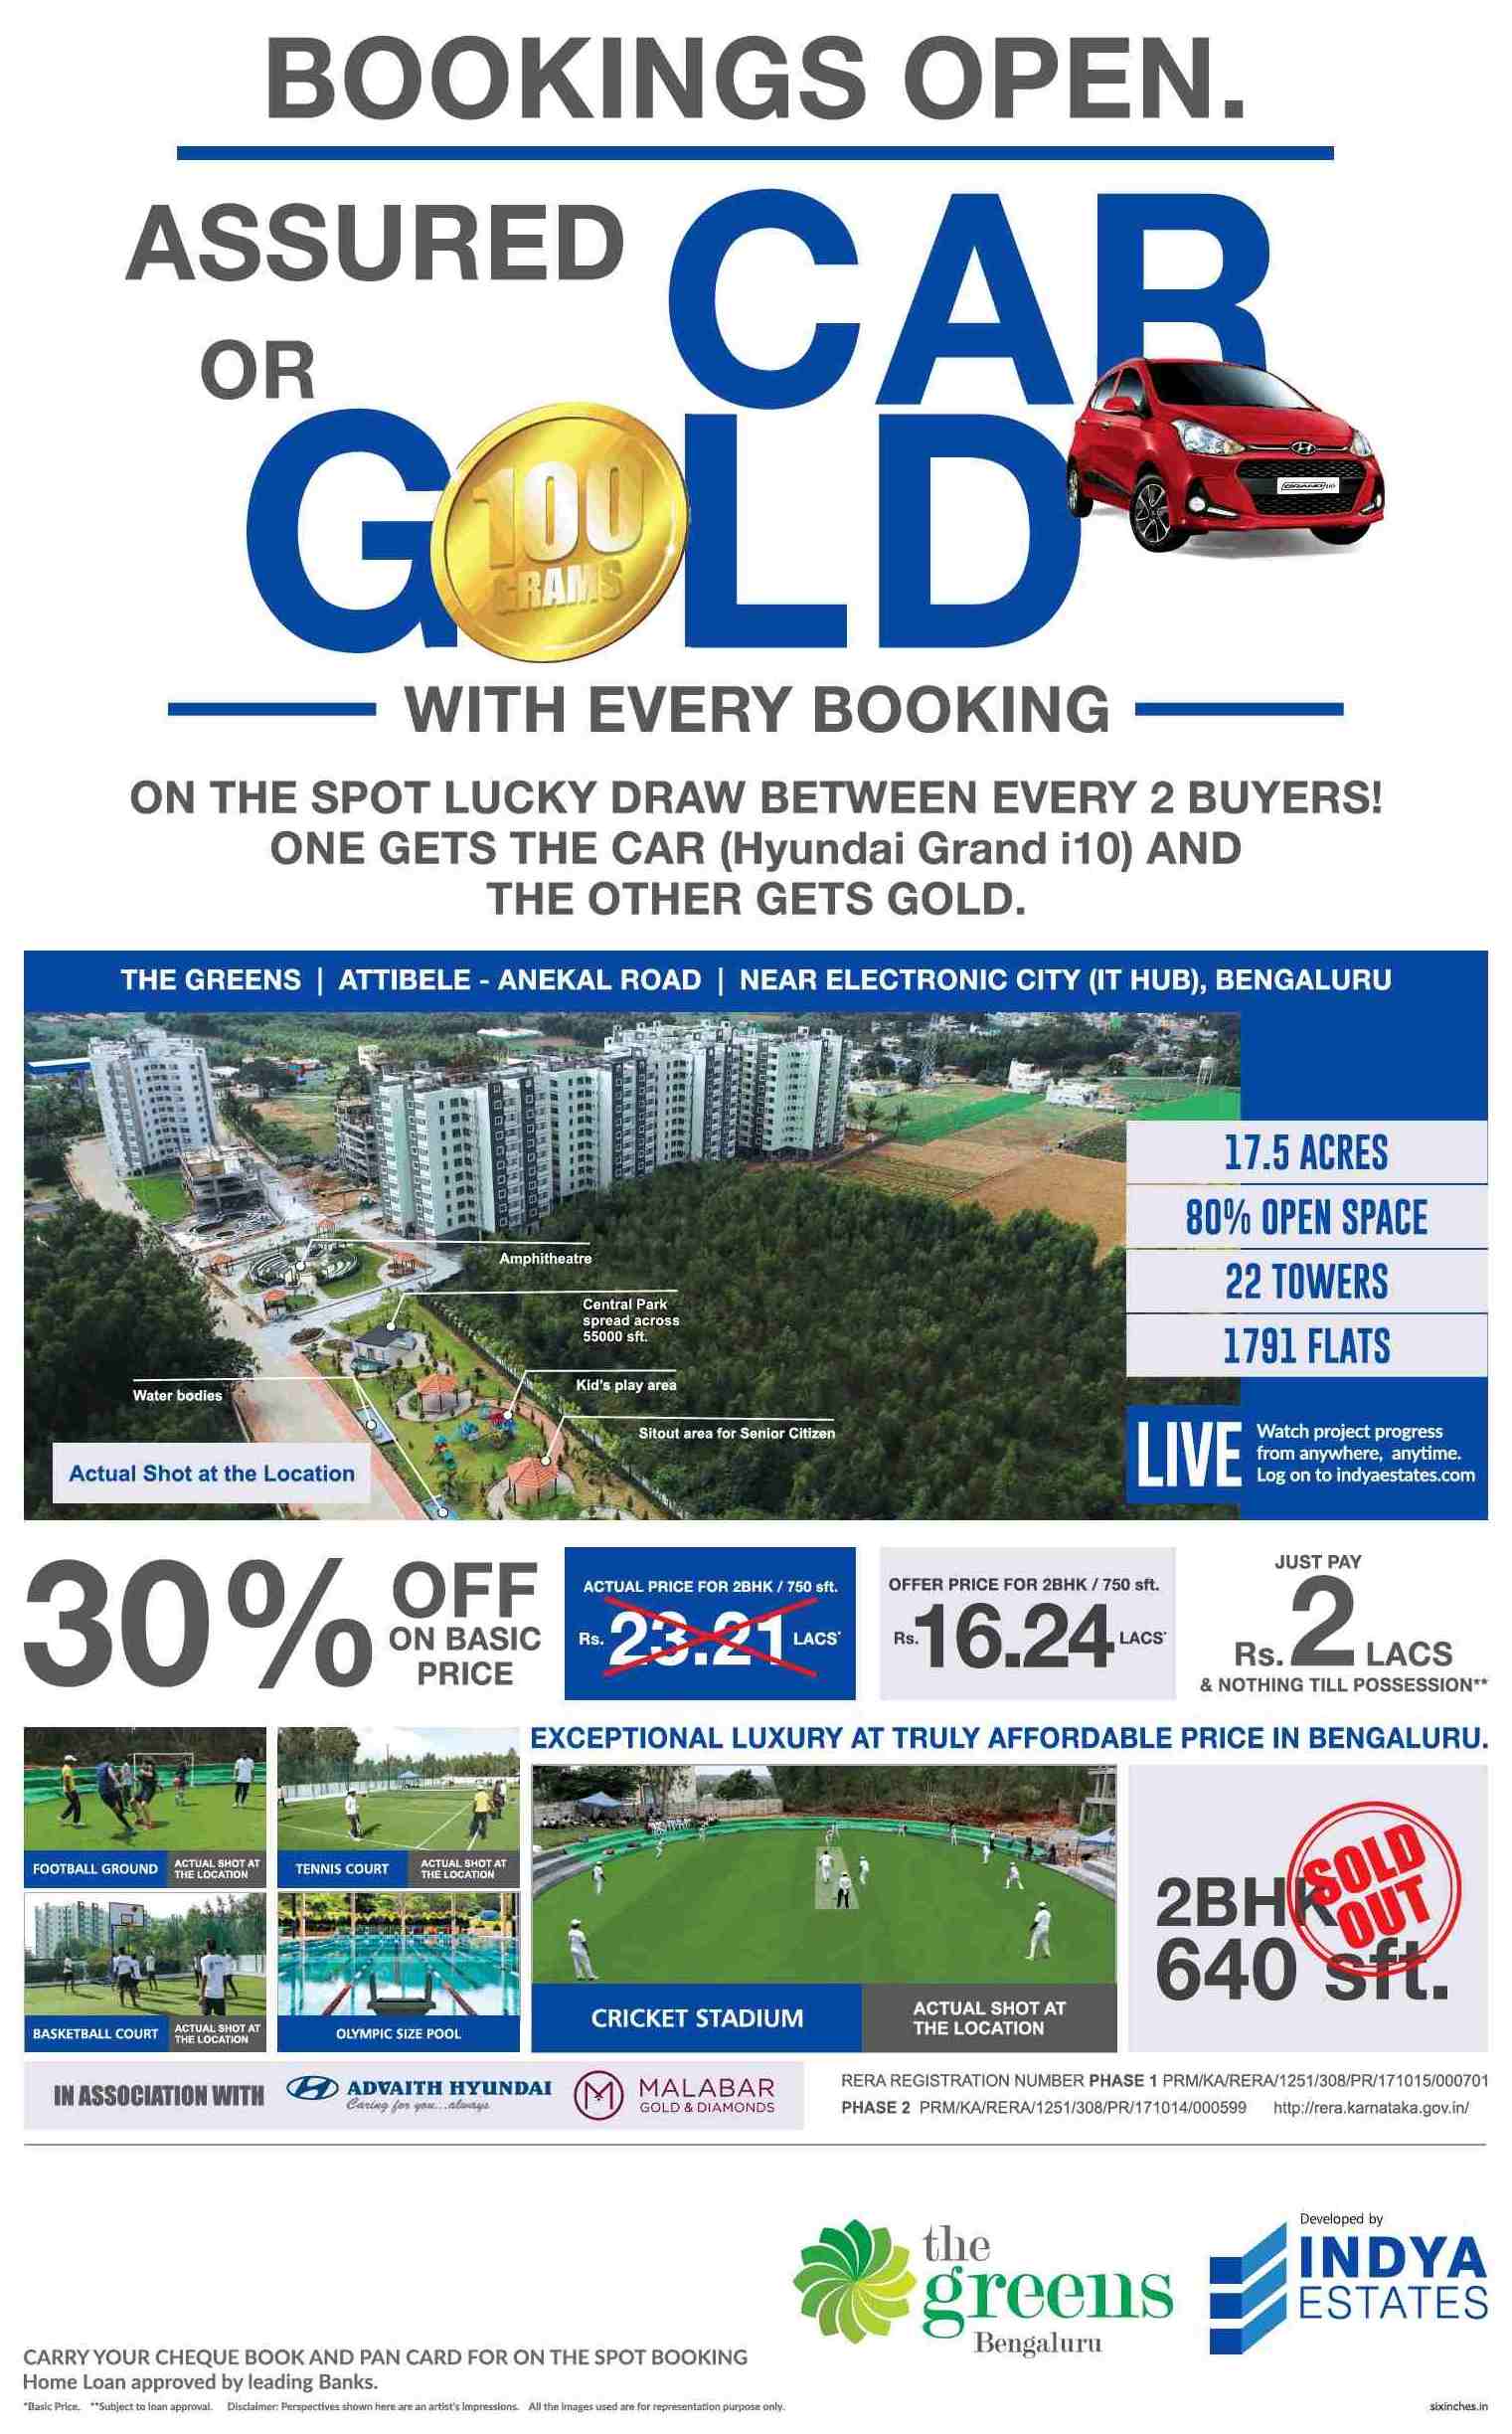 Get assured car or 100 gram gold with every booking at Indya The Greens in Bangalore Update